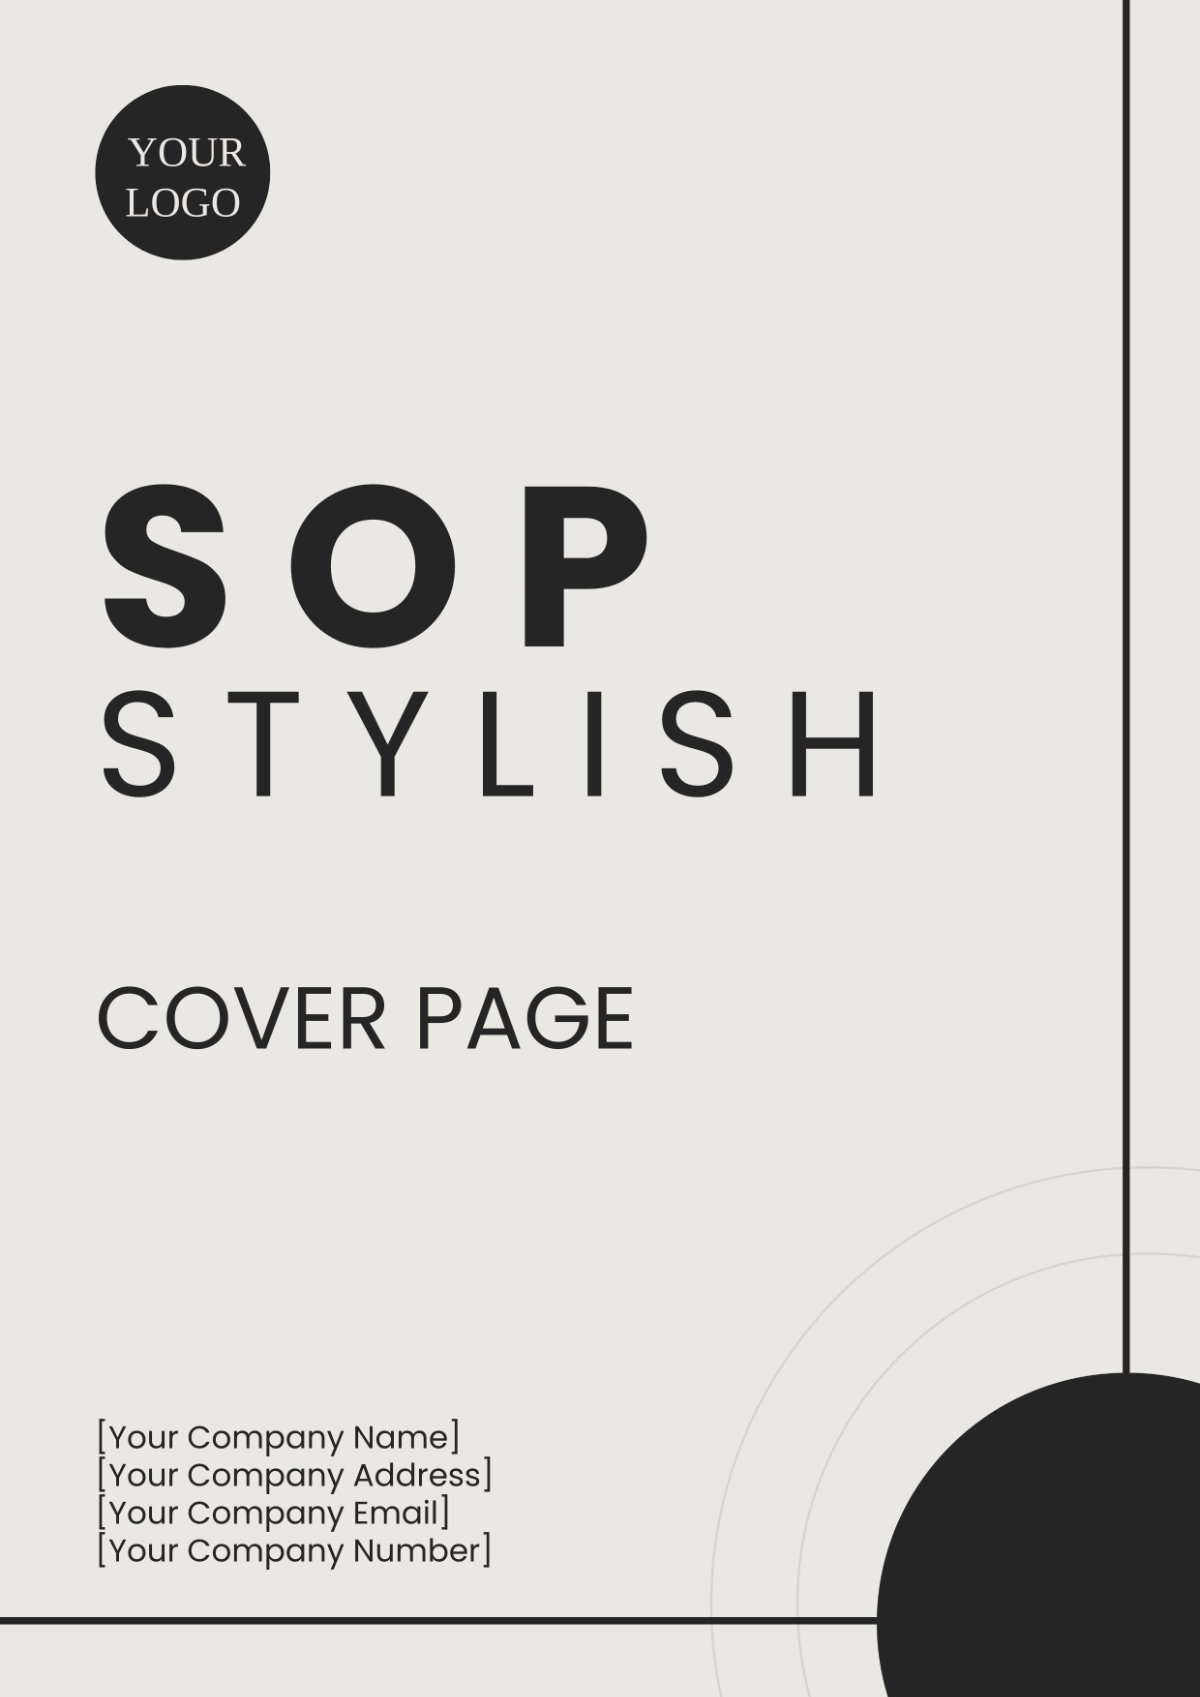 SOP Stylish Cover Page